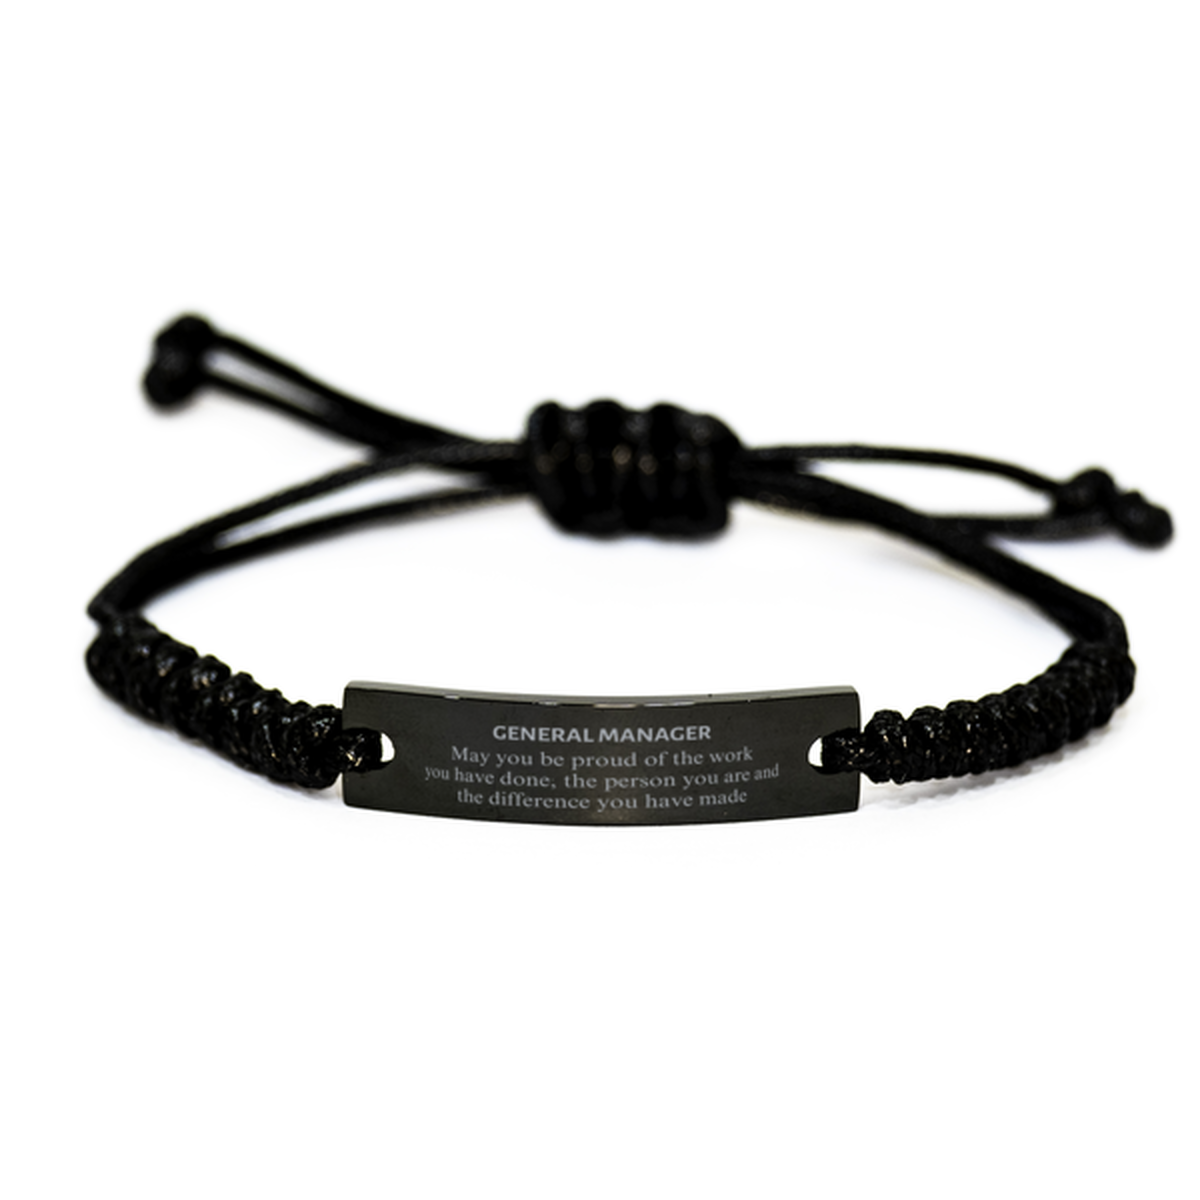 General Manager May you be proud of the work you have done, Retirement General Manager Black Rope Bracelet for Colleague Appreciation Gifts Amazing for General Manager